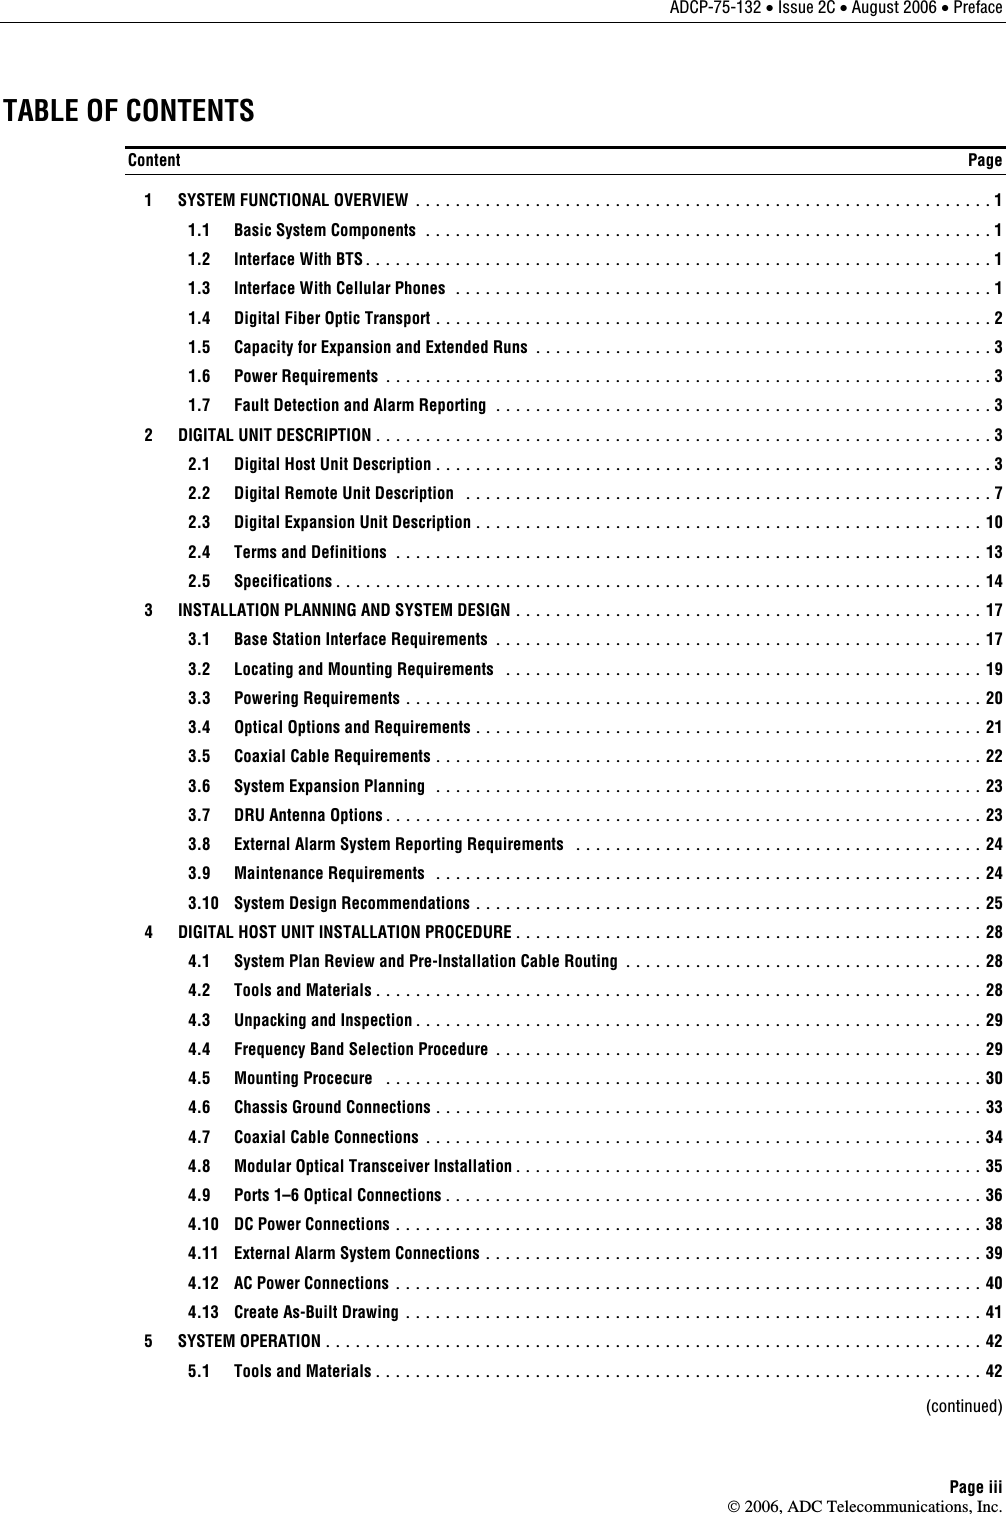 ADCP-75-132 • Issue 2C • August 2006 • Preface Page iii © 2006, ADC Telecommunications, Inc. TABLE OF CONTENTS Content  Page   1  SYSTEM FUNCTIONAL OVERVIEW .......................................................... 1   1.1  Basic System Components ......................................................... 1   1.2  Interface With BTS............................................................... 1   1.3  Interface With Cellular Phones ...................................................... 1   1.4  Digital Fiber Optic Transport ........................................................ 2   1.5  Capacity for Expansion and Extended Runs .............................................. 3  1.6 Power Requirements ............................................................. 3   1.7  Fault Detection and Alarm Reporting .................................................. 3   2  DIGITAL UNIT DESCRIPTION.............................................................. 3   2.1  Digital Host Unit Description........................................................ 3   2.2  Digital Remote Unit Description ..................................................... 7   2.3  Digital Expansion Unit Description................................................... 10   2.4  Terms and Definitions ........................................................... 13  2.5 Specifications................................................................. 14   3  INSTALLATION PLANNING AND SYSTEM DESIGN ............................................... 17   3.1  Base Station Interface Requirements ................................................. 17   3.2  Locating and Mounting Requirements ................................................ 19  3.3 Powering Requirements .......................................................... 20   3.4  Optical Options and Requirements................................................... 21   3.5  Coaxial Cable Requirements....................................................... 22   3.6  System Expansion Planning ....................................................... 23   3.7  DRU Antenna Options............................................................ 23   3.8  External Alarm System Reporting Requirements ......................................... 24  3.9 Maintenance Requirements ....................................................... 24   3.10  System Design Recommendations ................................................... 25   4  DIGITAL HOST UNIT INSTALLATION PROCEDURE............................................... 28   4.1  System Plan Review and Pre-Installation Cable Routing .................................... 28   4.2  Tools and Materials............................................................. 28   4.3  Unpacking and Inspection......................................................... 29   4.4  Frequency Band Selection Procedure ................................................. 29  4.5 Mounting Procecure ............................................................ 30   4.6  Chassis Ground Connections....................................................... 33   4.7  Coaxial Cable Connections ........................................................ 34   4.8  Modular Optical Transceiver Installation............................................... 35   4.9  Ports 1–6 Optical Connections...................................................... 36   4.10  DC Power Connections ........................................................... 38   4.11  External Alarm System Connections .................................................. 39   4.12  AC Power Connections ........................................................... 40   4.13  Create As-Built Drawing .......................................................... 41  5  SYSTEM OPERATION.................................................................. 42   5.1  Tools and Materials............................................................. 42 (continued) 